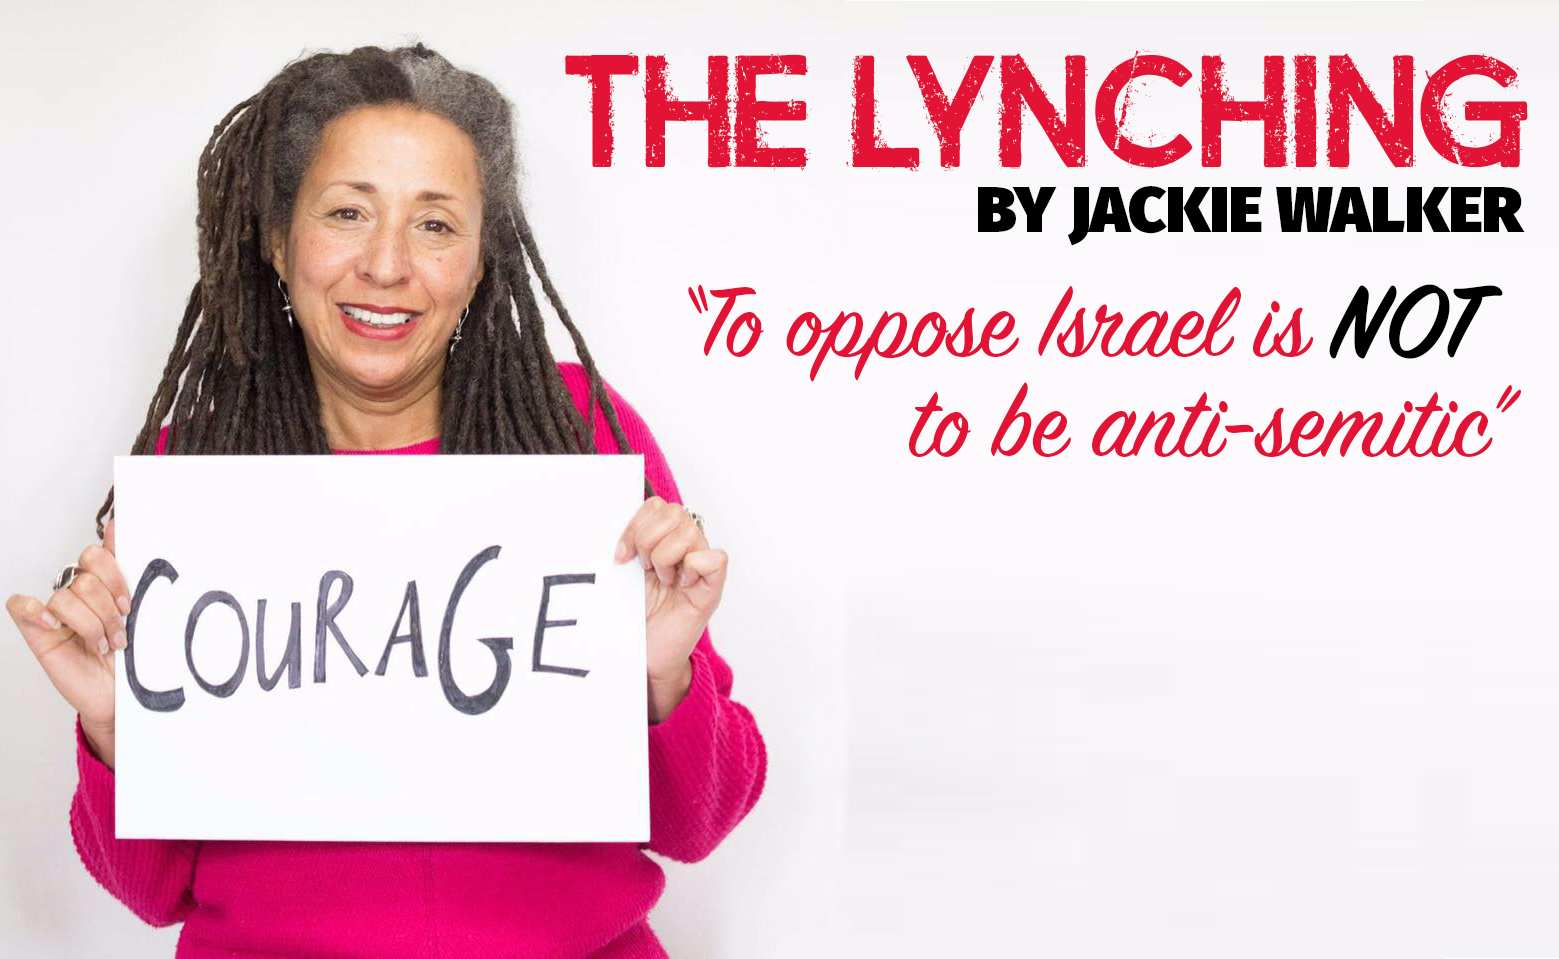 The Lynching: A Play Written & Performed by Jackie Walker